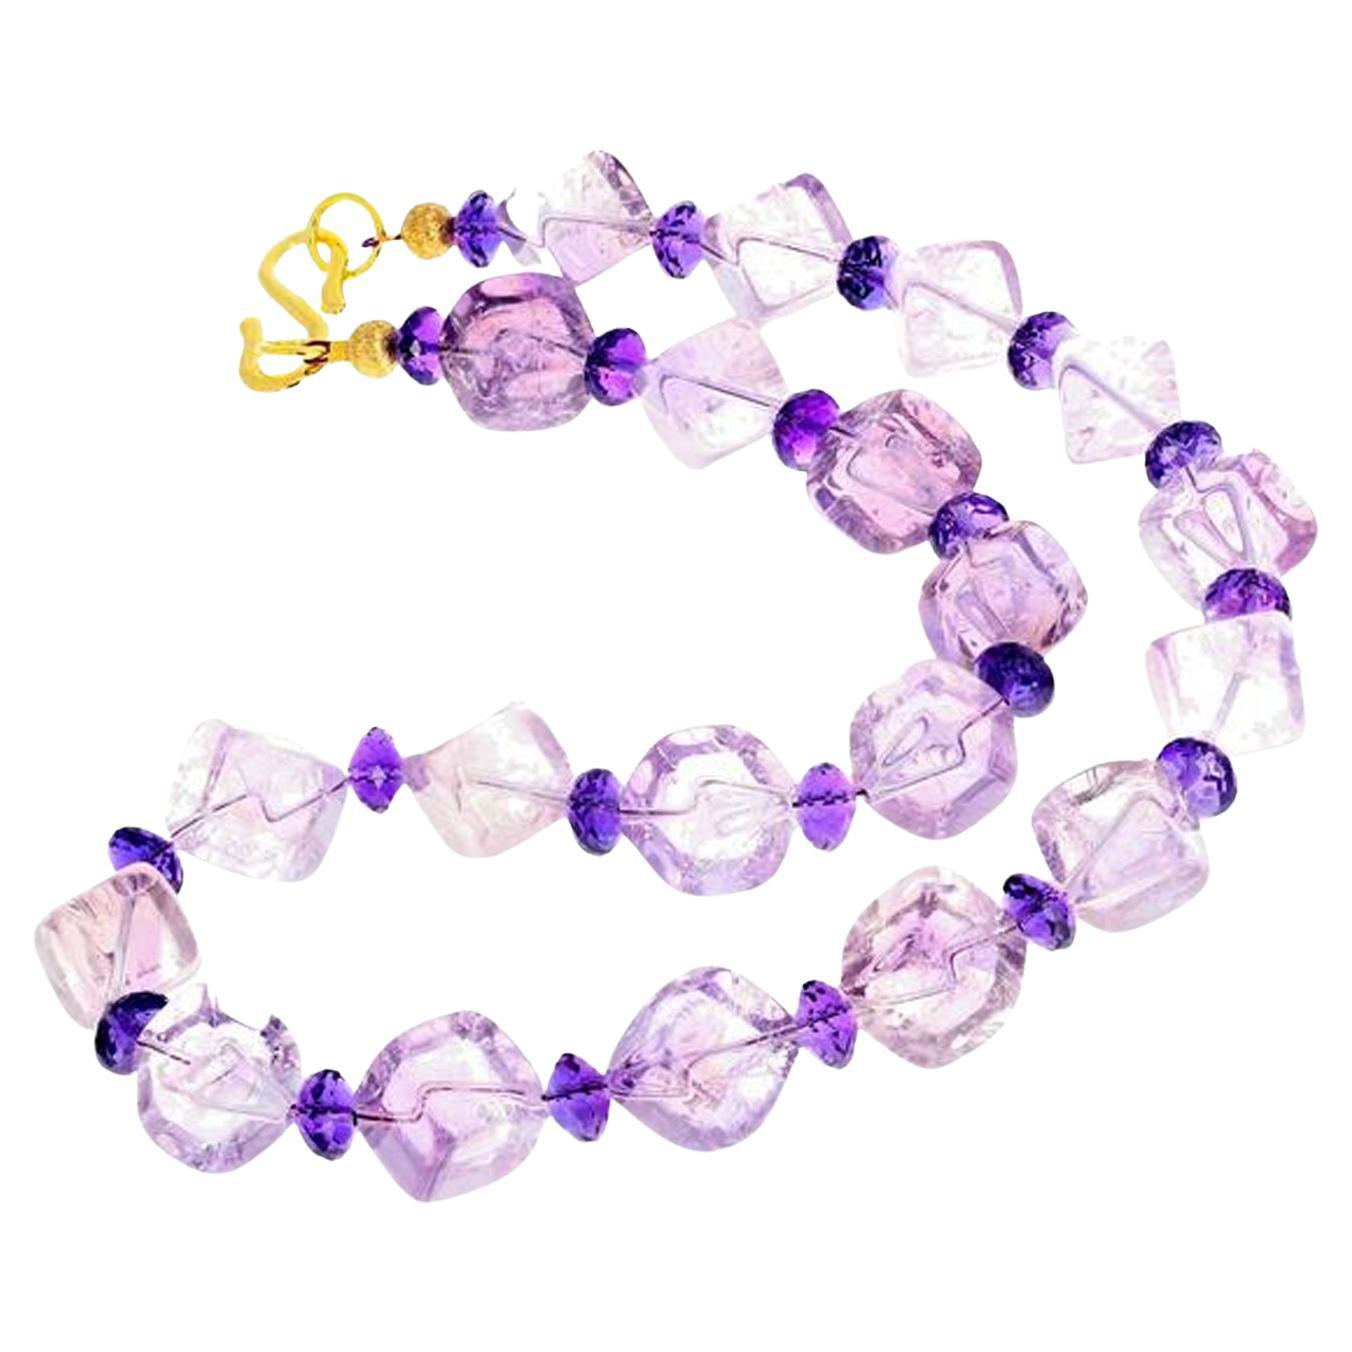 Cubes of translucent Rose of France Amethysts (approximately 12 mm x 12 mm) are enhanced with glittring checkerboard gem cut Amethyst rondels. This necklace is 18.75 inches long with a gold washed hook clasp. Spectacular optical effect in the Rose